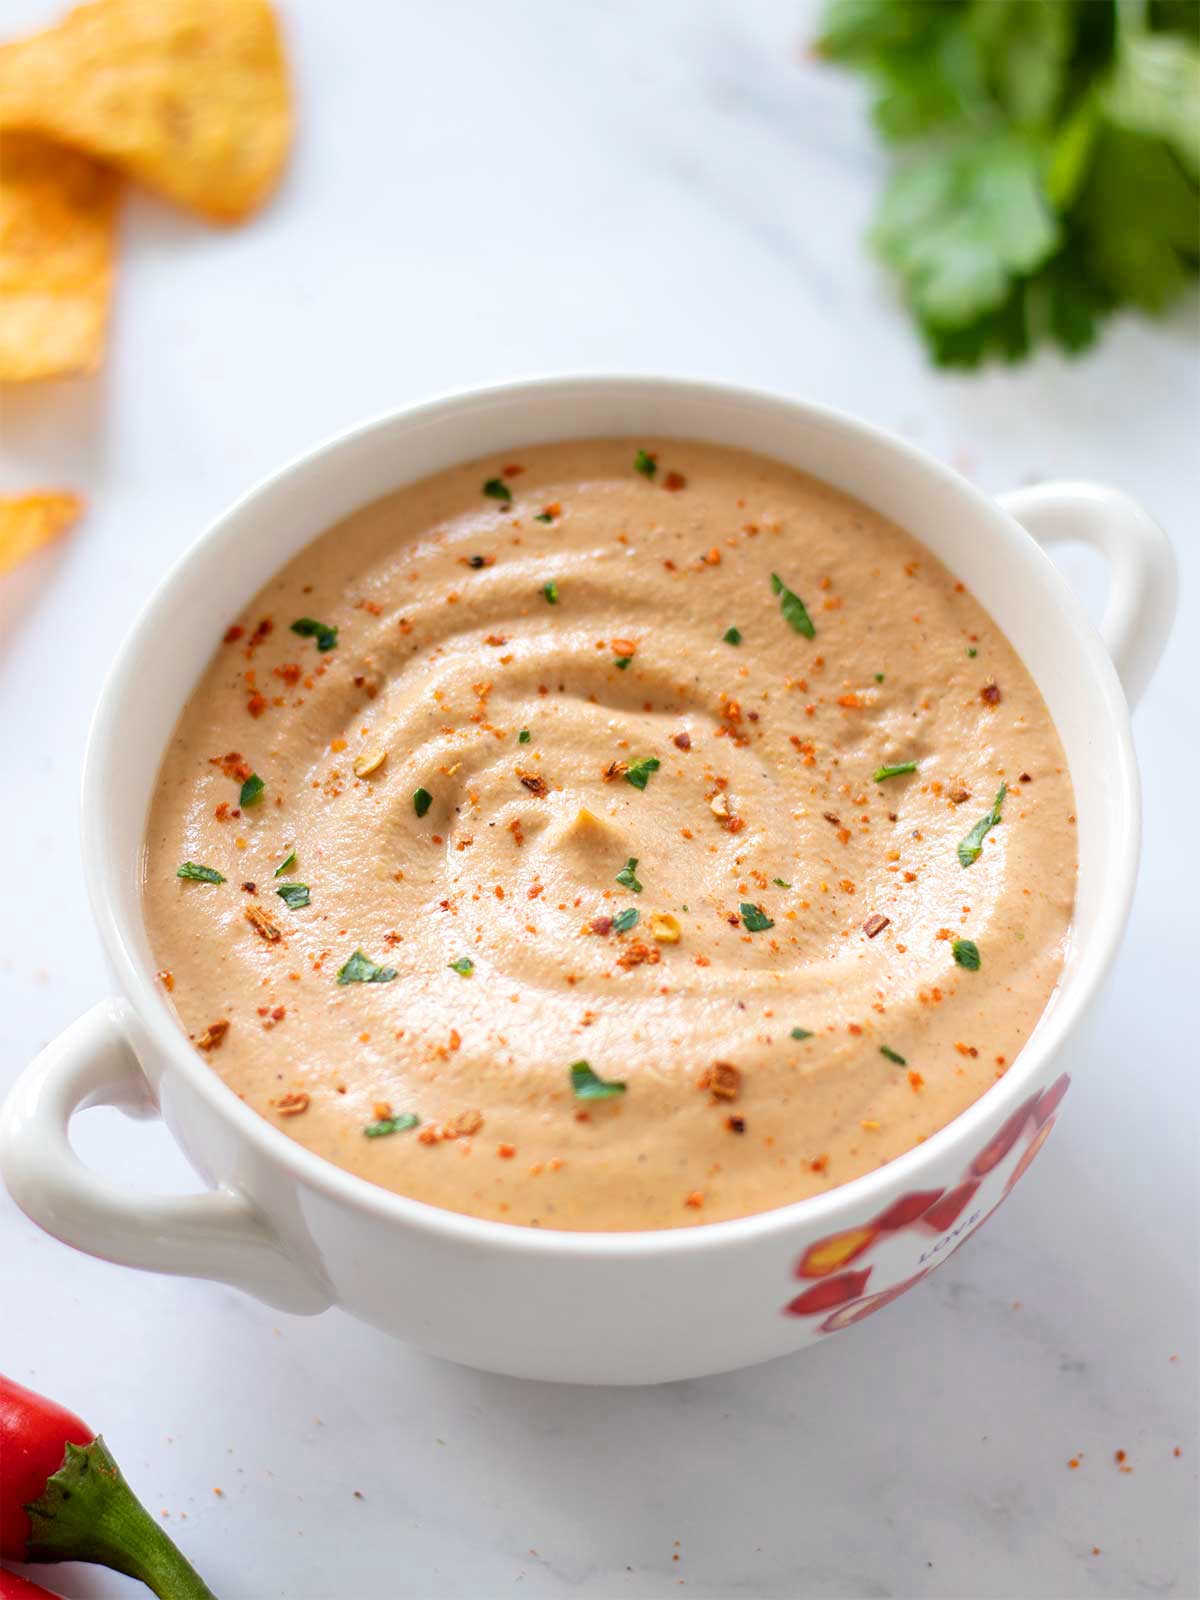 Spicy homemade queso dip made with cashews and whole foods in a bowl topped with red pepper flakes and cholled parsley